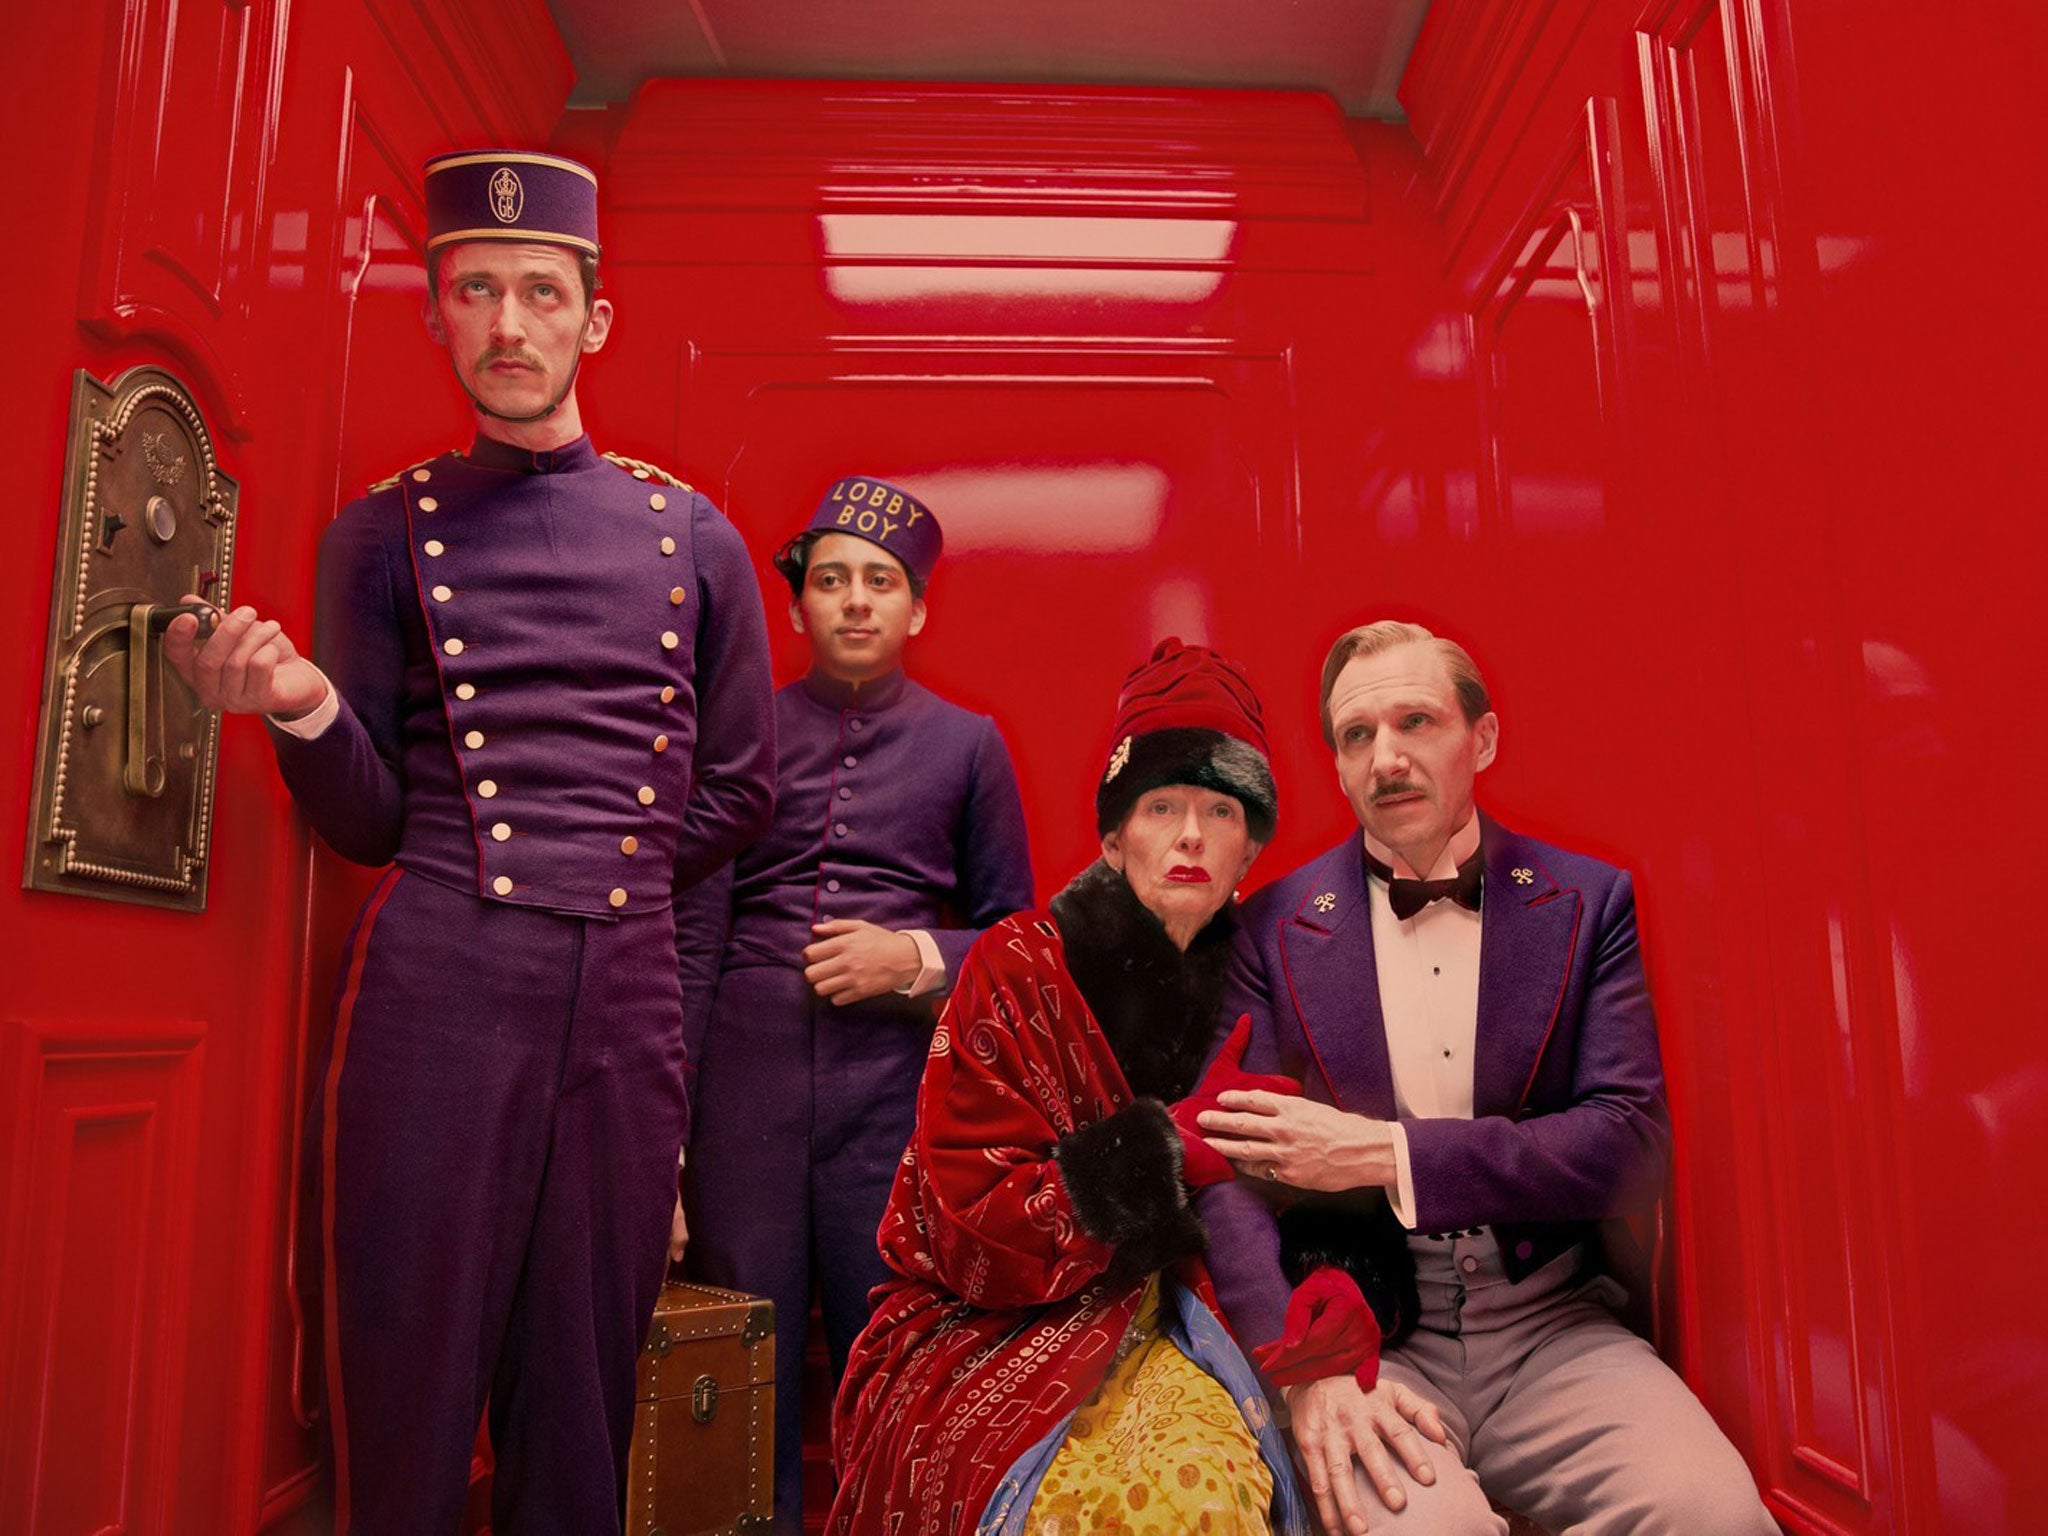 The Grand Budapest Hotel features many of Anderson's oft-collaborators